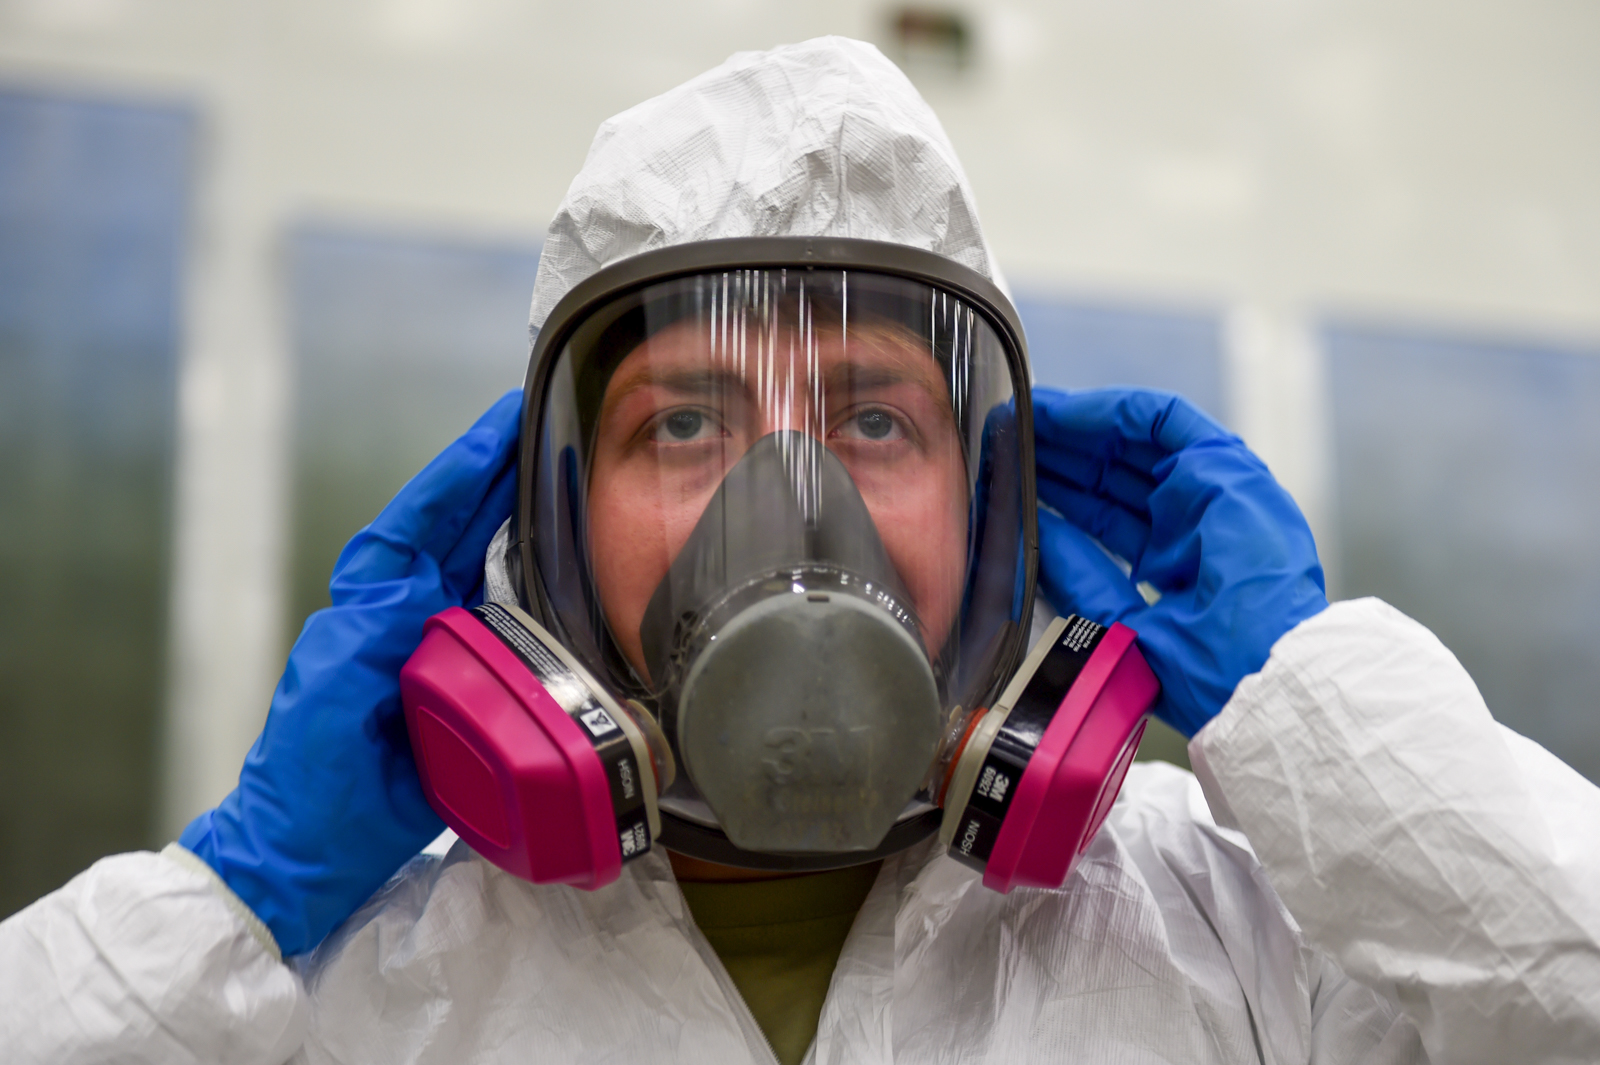 Air Force Senior Airman Kurtis Steinecke dons a Tyvek suit and full-face respirator before painting the P-38G Lightning inside Hangar 21 at Joint Base Elmendorf-Richardson, Alaska, July 17, 2017. Airmen are required to wear personal protective equipment when working on the P-38G Lightning. Steinecke is assigned to the 3rd Maintenance Squadron as an aircraft structural maintenance journeyman. (U.S. Air Force photo by Staff Sgt. Sheila deVera)